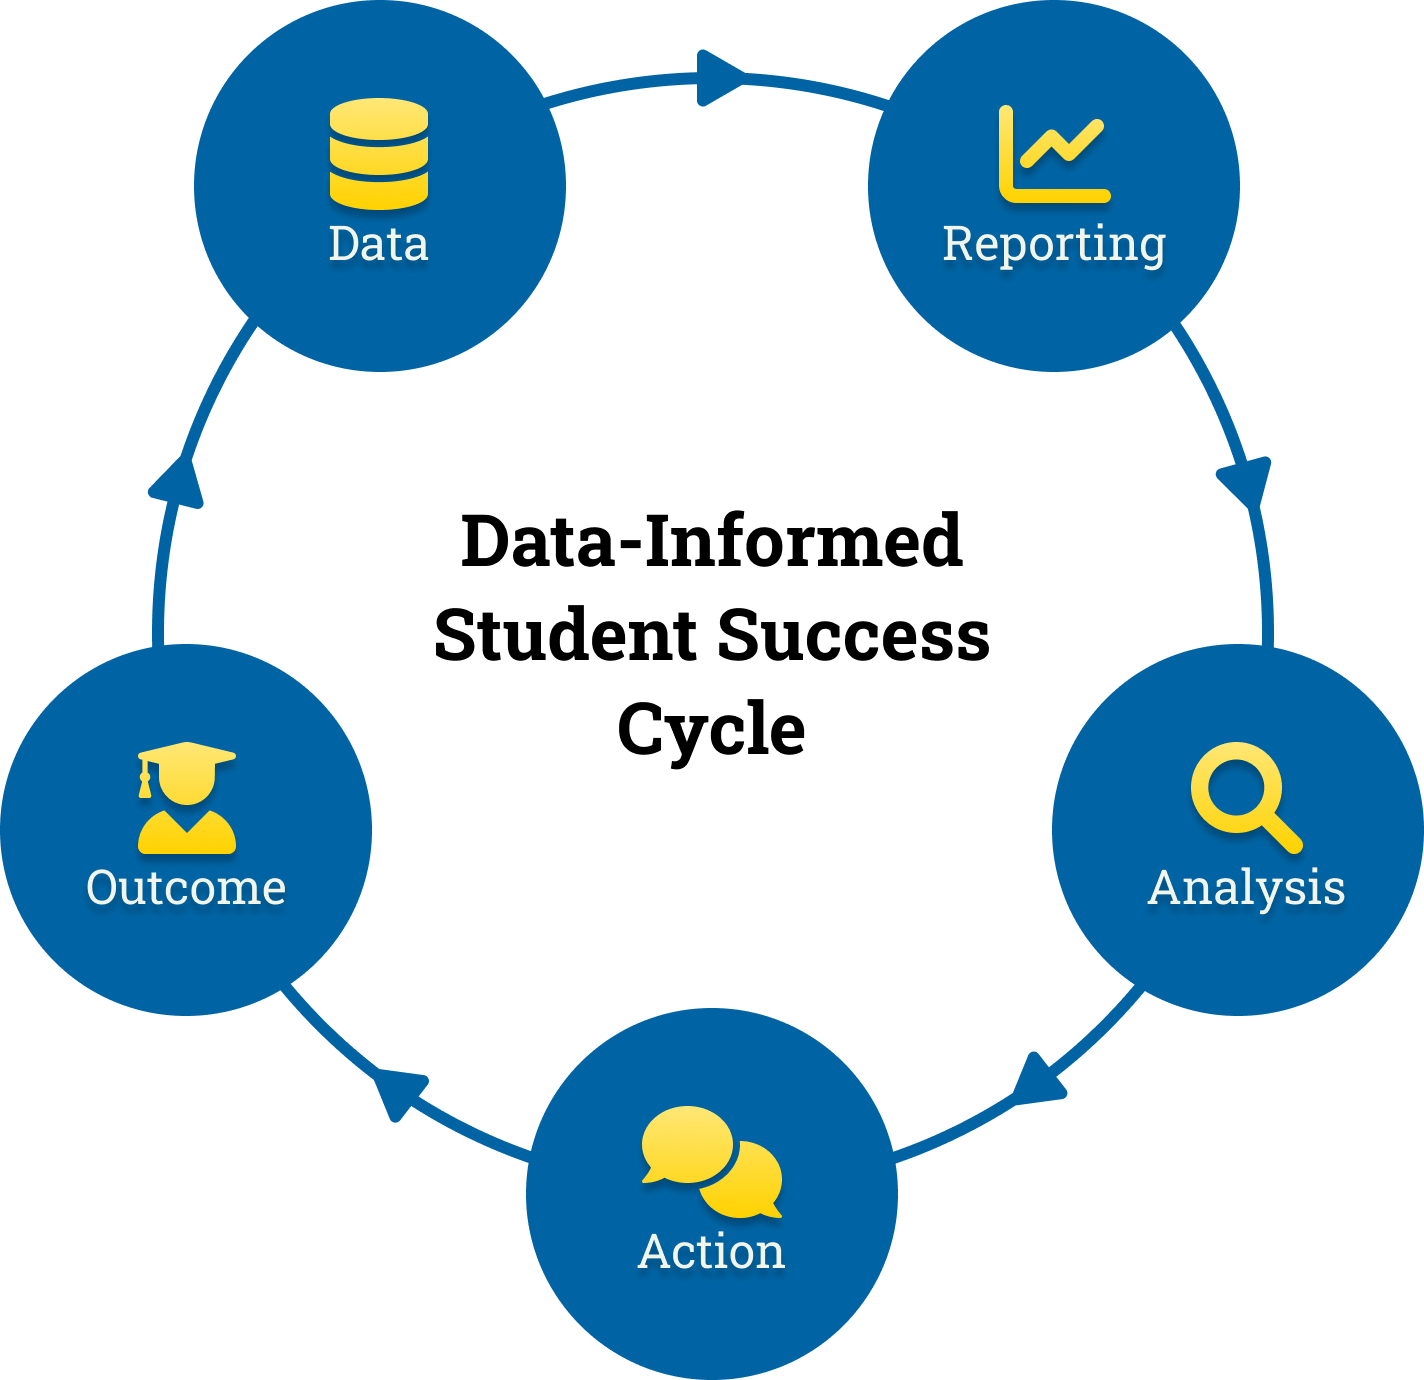 Diagram showing the steps of the data-informed student success cycle: gathering data, analyzing data, reporting data, and taking action.